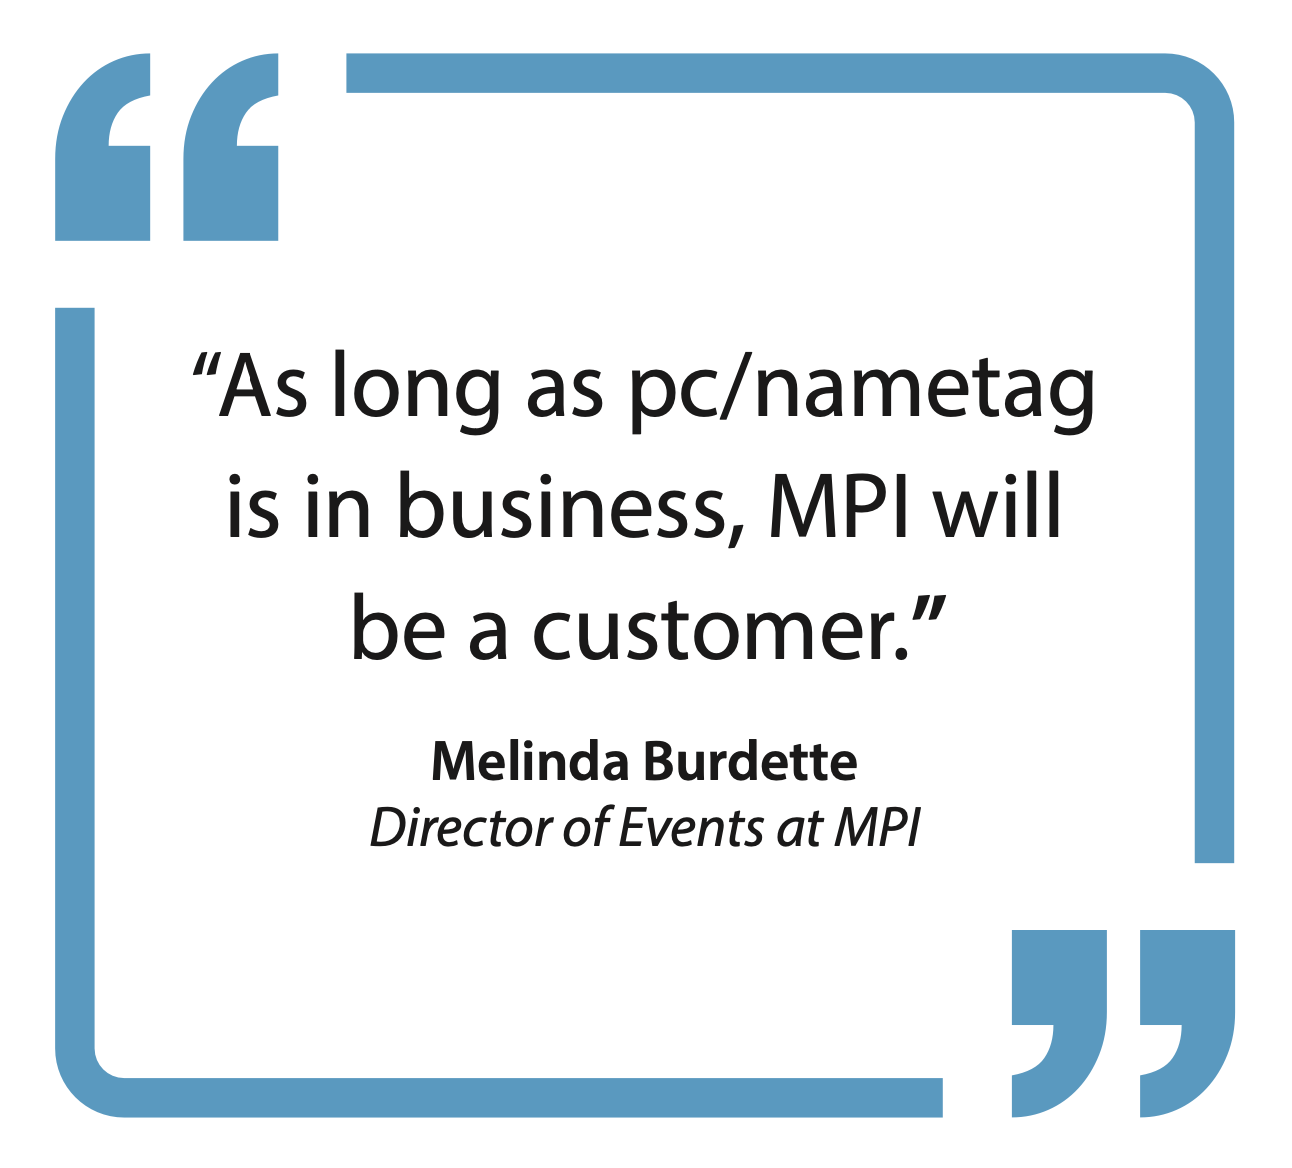 Quote from Burdette - As long as pc/nametag is in business, MPI will be a customer